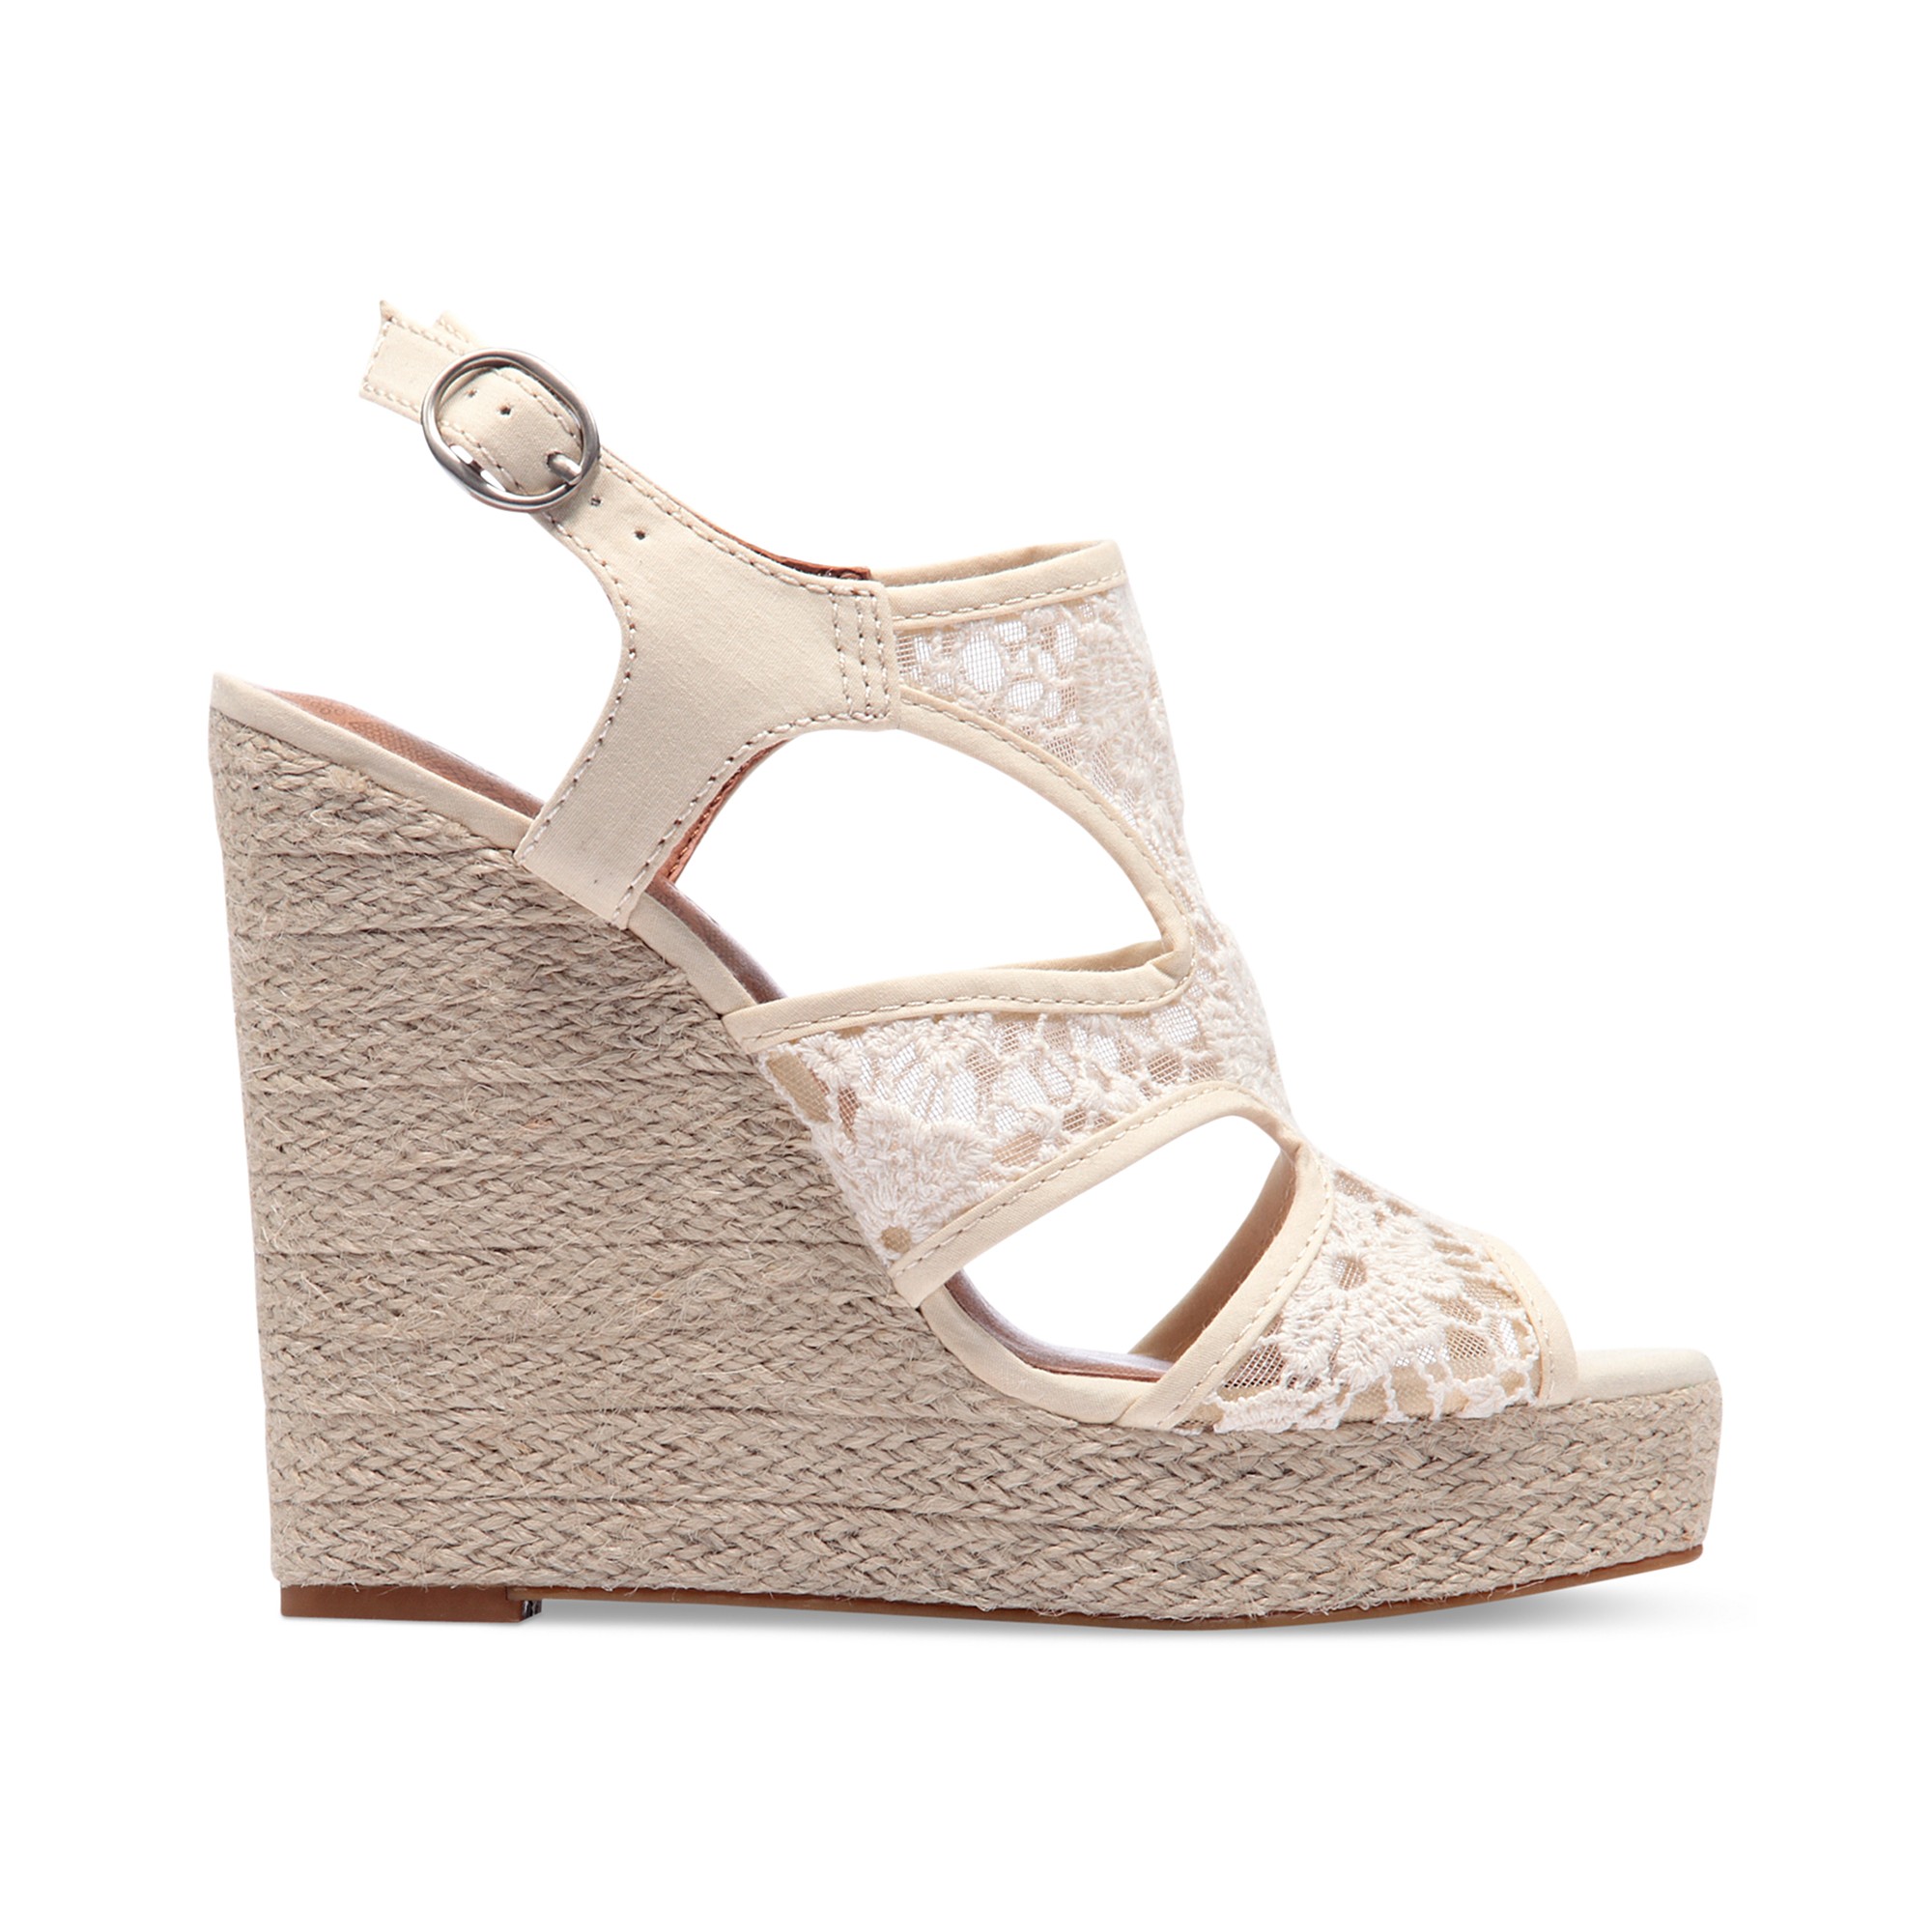 Lucky Brand Riedel Lace Platform Wedge Sandals in Natural - Lyst